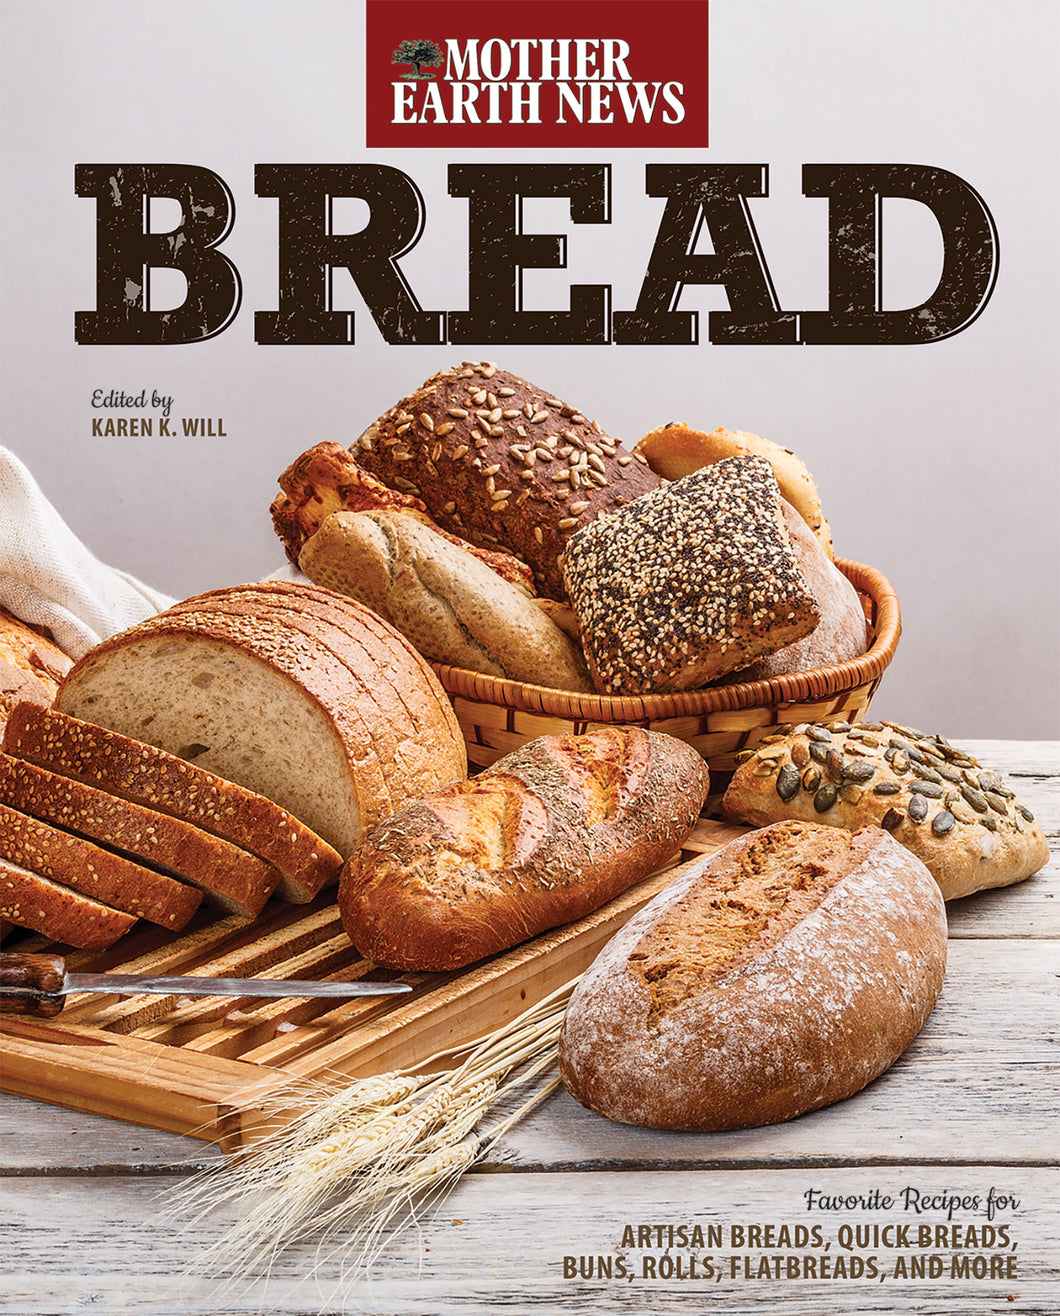 MOTHER EARTH NEWS: BREAD